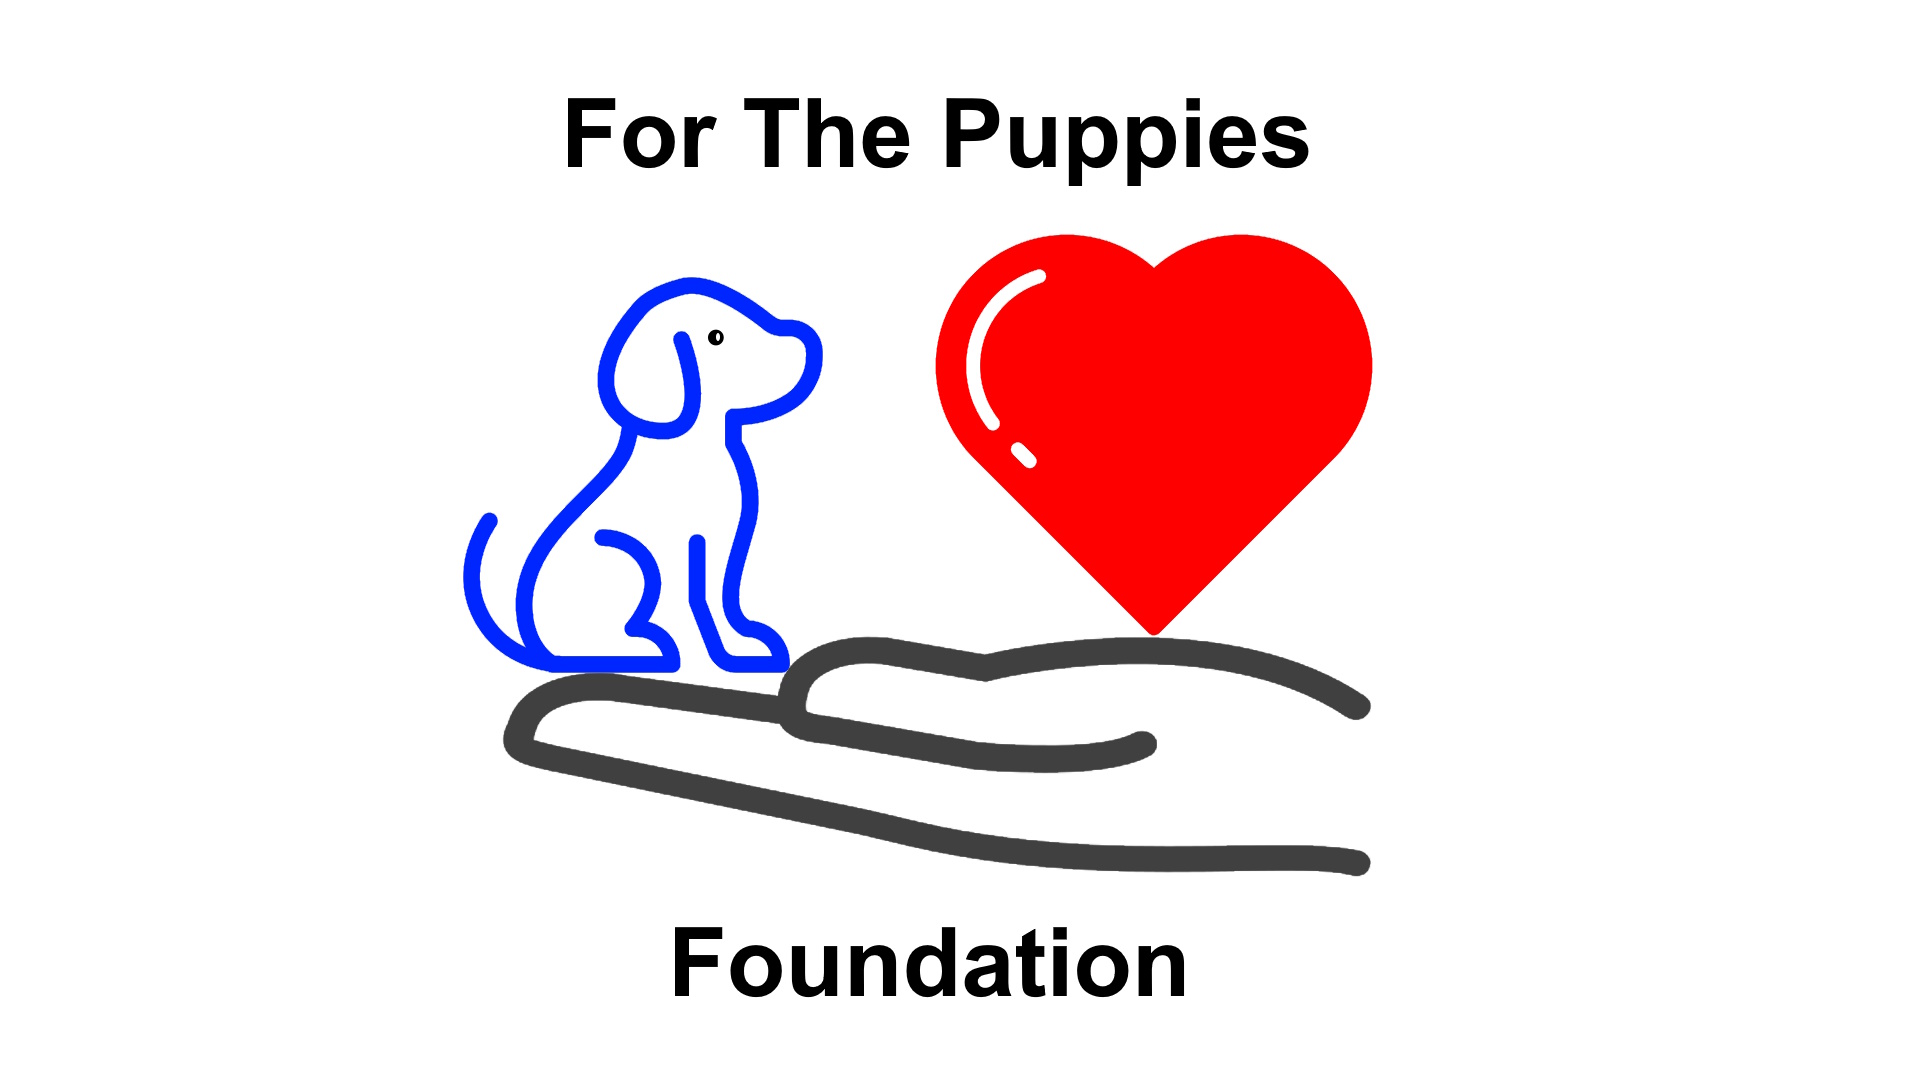 For The Puppies Foundation Link